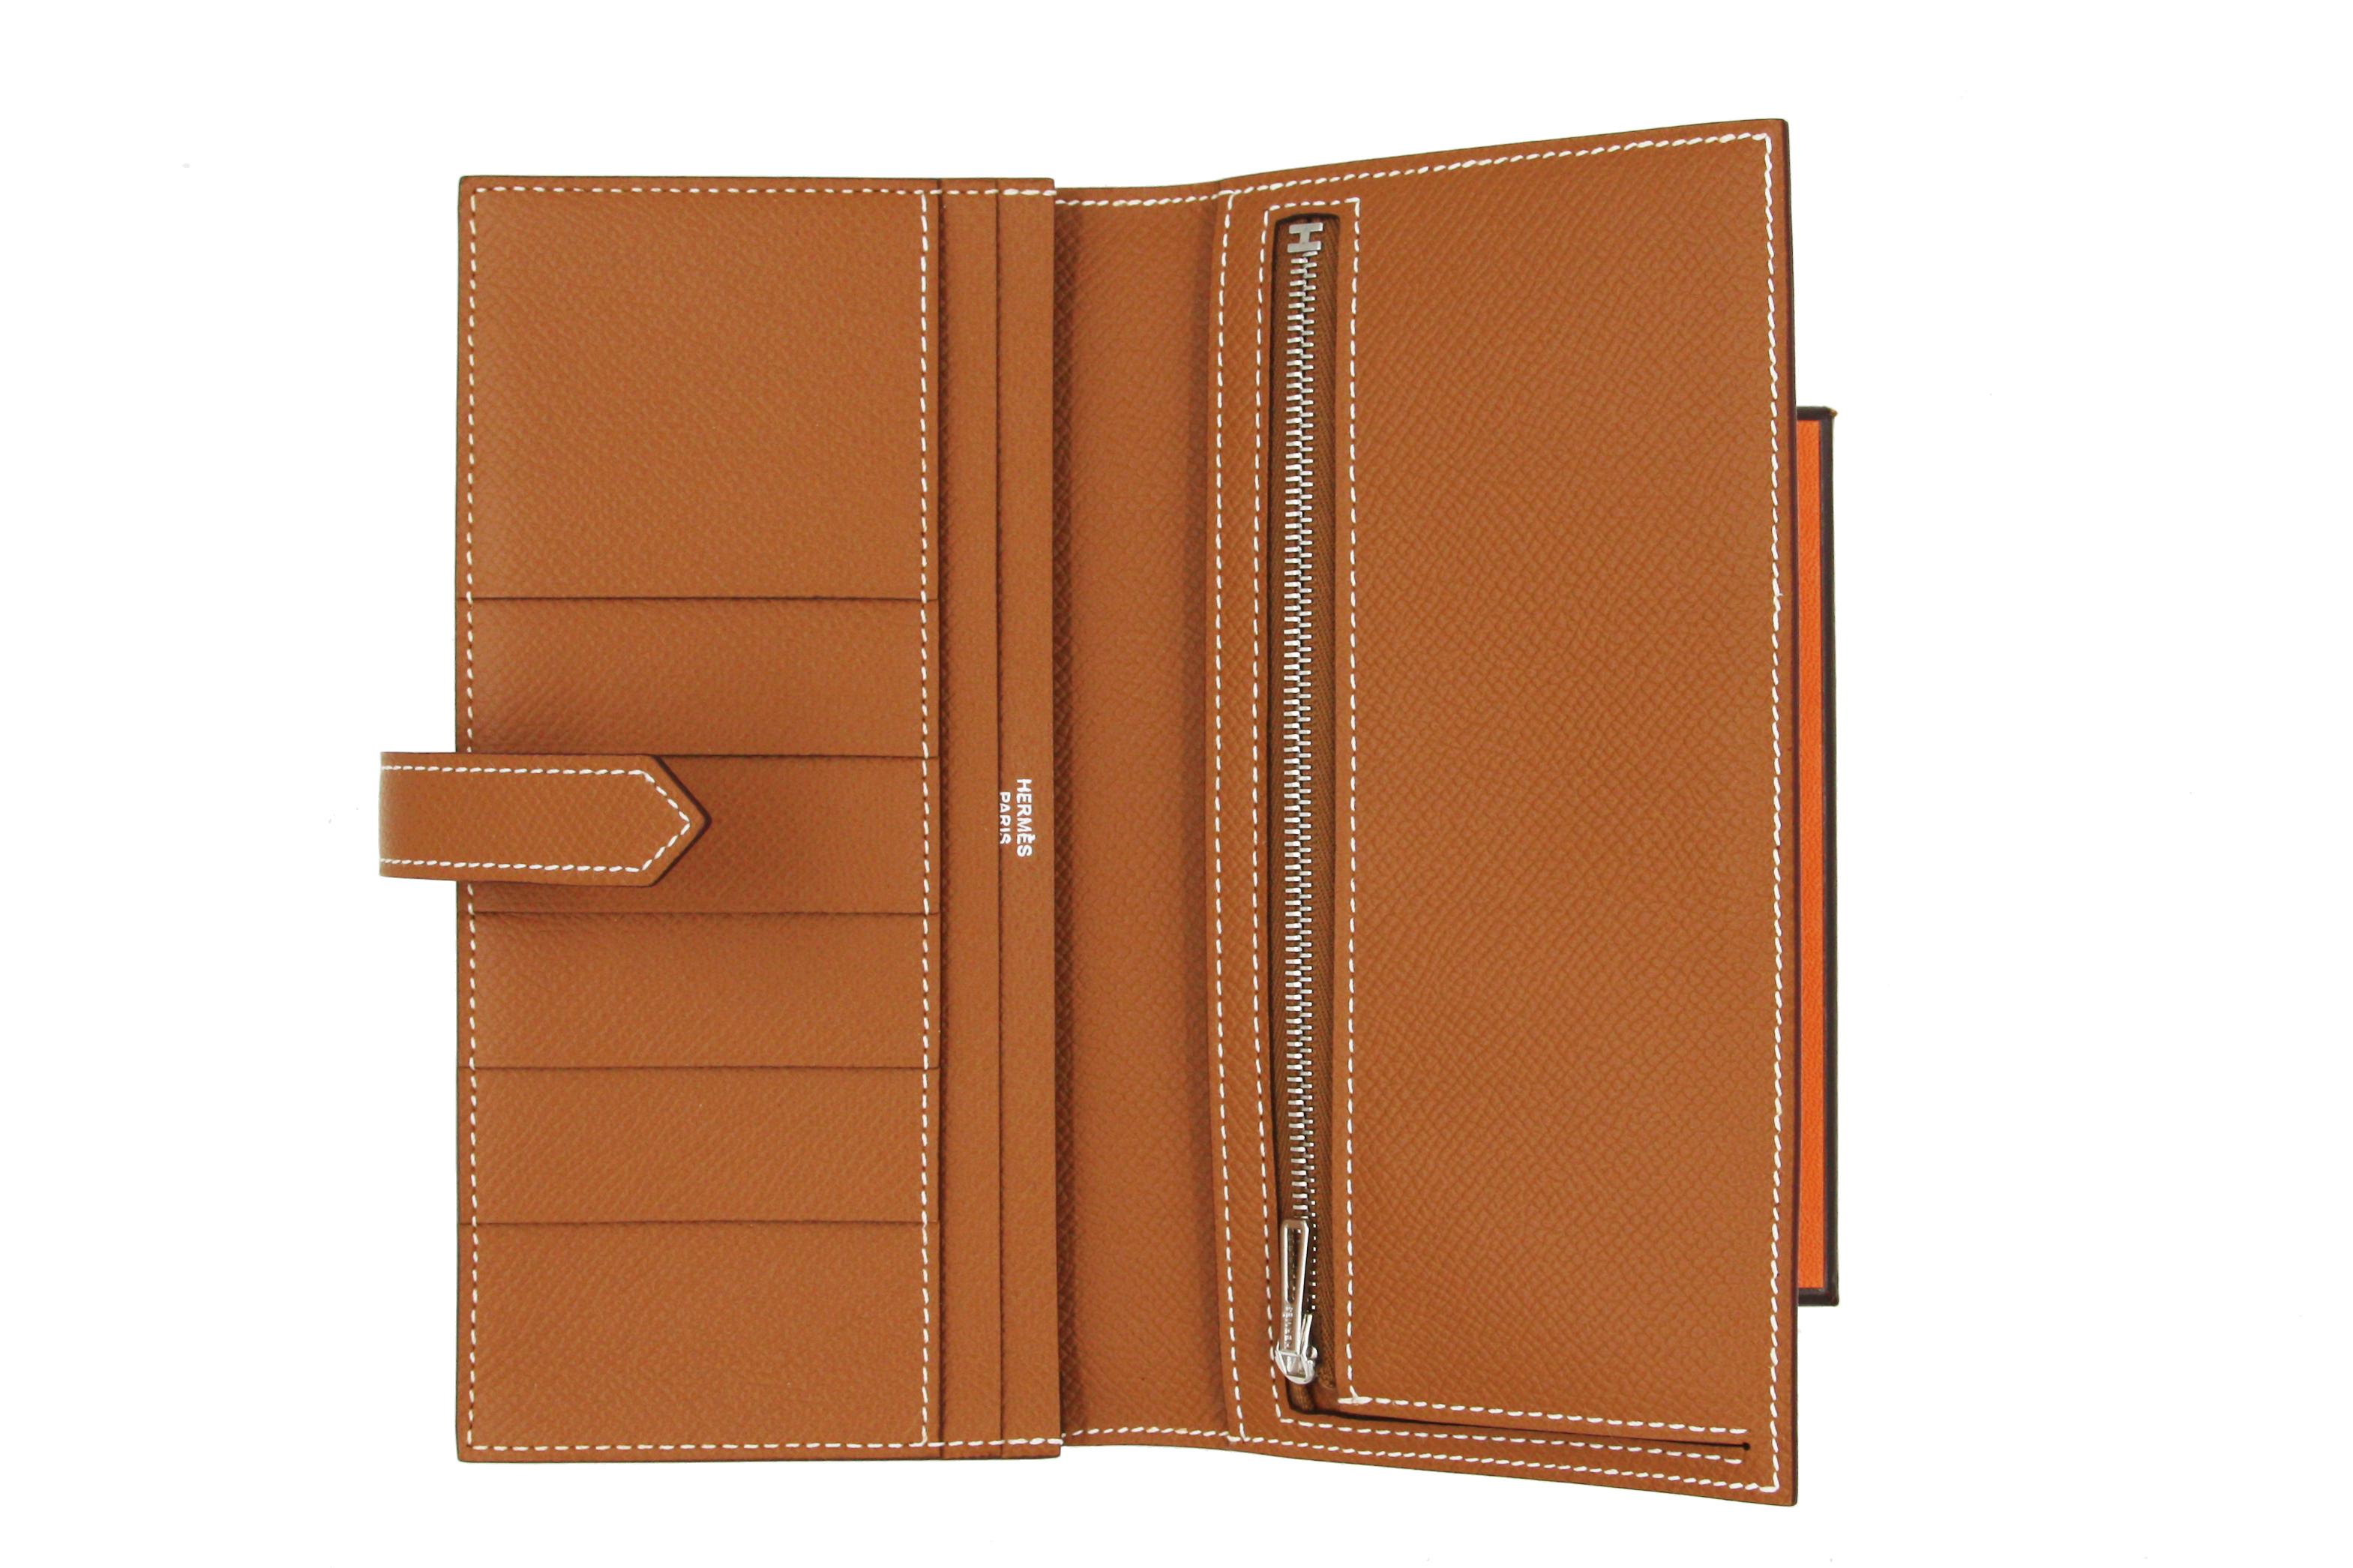 Wallet with 5 credit card slots, 2 pockets, zipped change purse and gold plated 'H' tab closure

Color: Camel
Measures 6.9